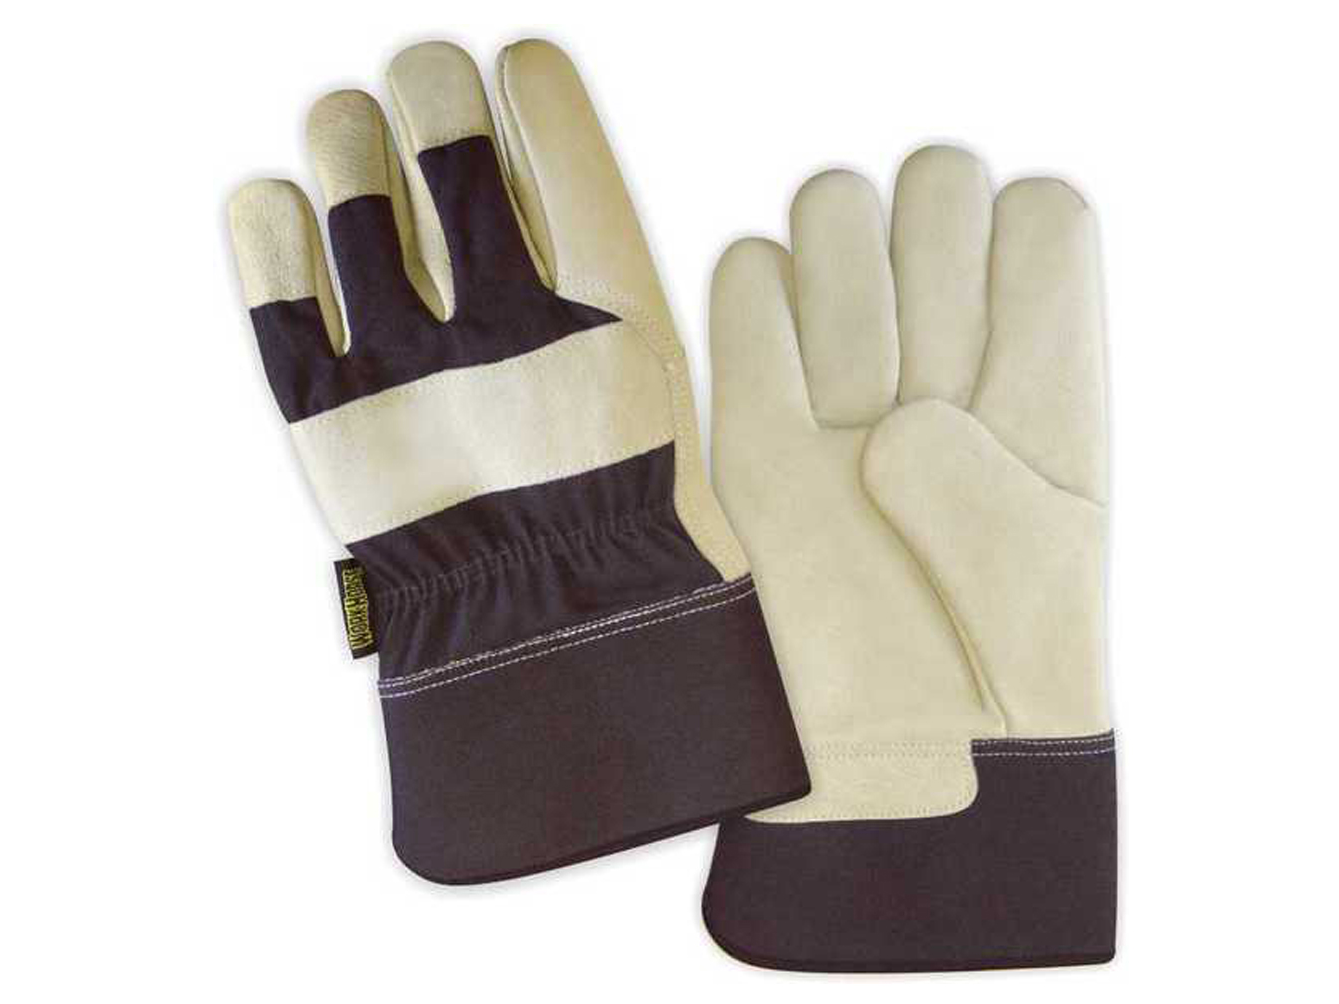 Workhorse® leather glove, thick fleece lining